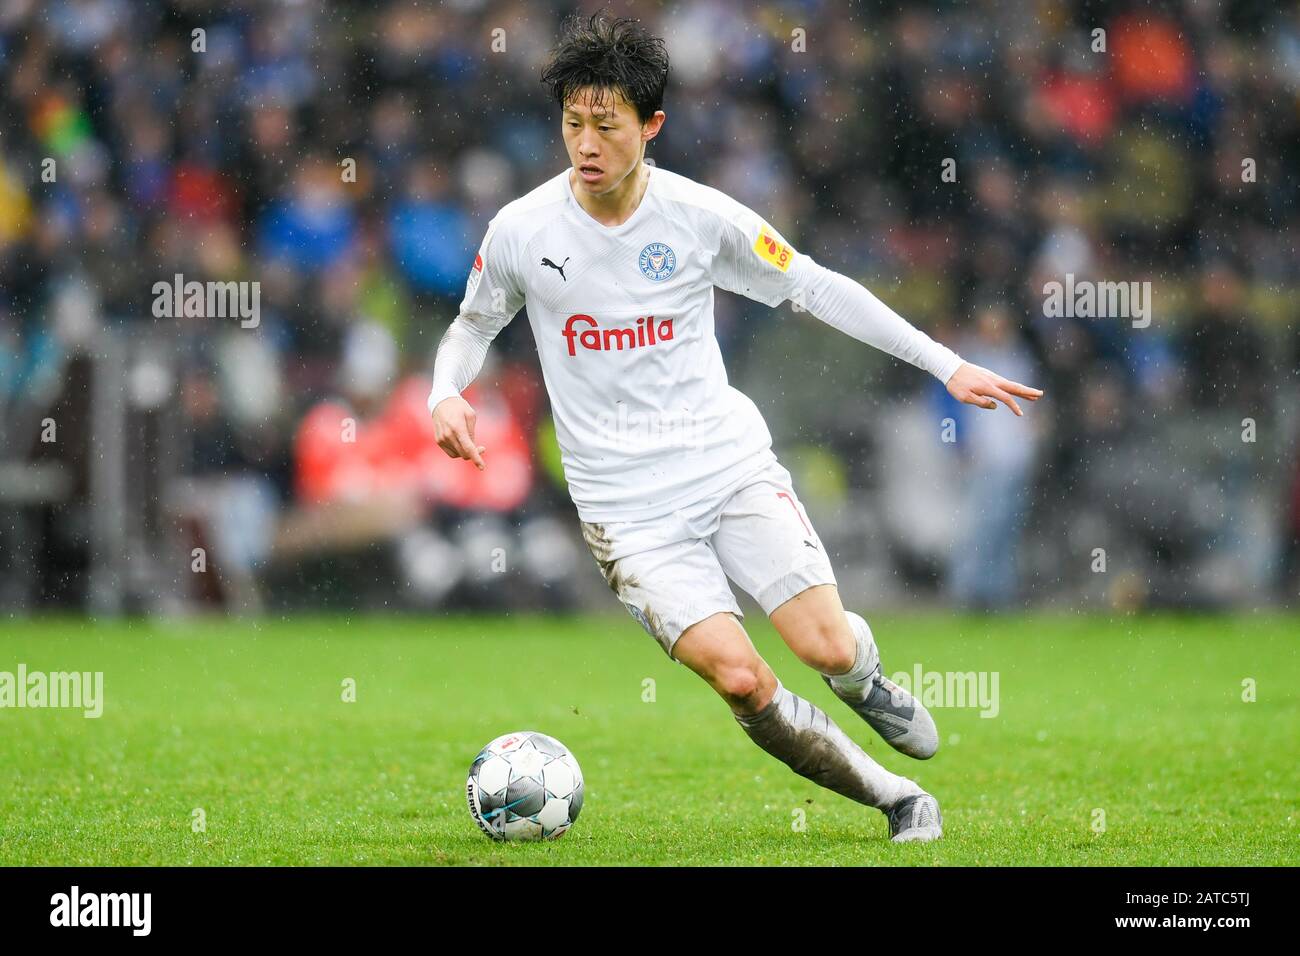 Karlsruhe, Germany. 01st Feb, 2020. Football: 2nd Bundesliga, 20th matchday, Karlsruher SC - Holstein Kiel, Wildparkstadion. Kiel's Jae-sung Lee in action. Credit: Tom Weller/dpa - IMPORTANT NOTE: In accordance with the regulations of the DFL Deutsche Fußball Liga and the DFB Deutscher Fußball-Bund, it is prohibited to exploit or have exploited in the stadium and/or from the game taken photographs in the form of sequence images and/or video-like photo series./dpa/Alamy Live News Stock Photo